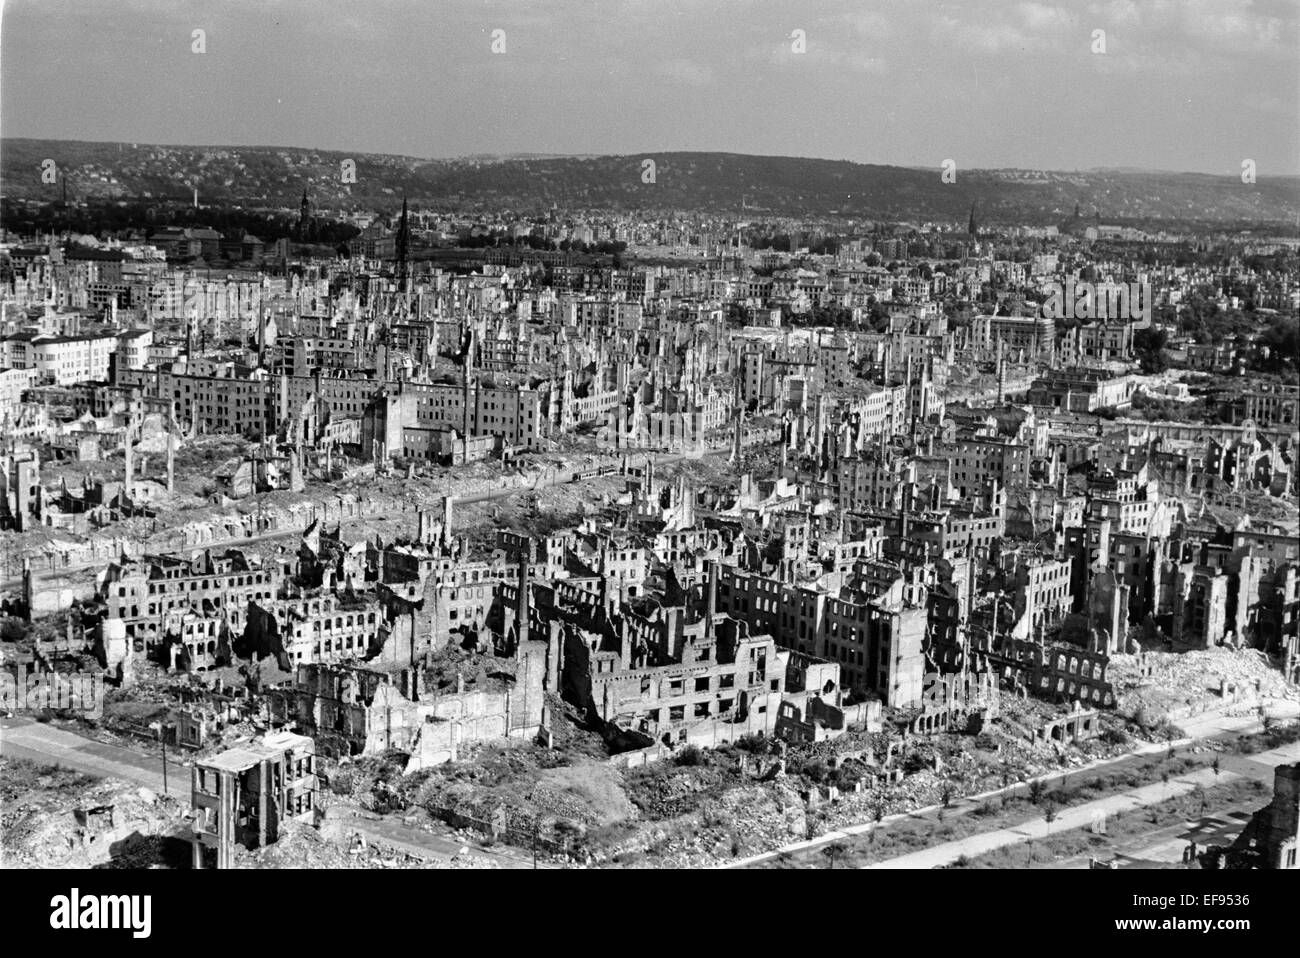 View from the Town Hall tower overlooking the Grunaer Straße and the towers of the St. John's Church (middle) and the Trinitatiskirche (Trinity Church) (left) of the destroyed inner-city of Dresden. Date unknown (1945-1955). Photo: Deutsche Fotothek/Richard Peter jun. - NO WIRE SERVICE - Stock Photo